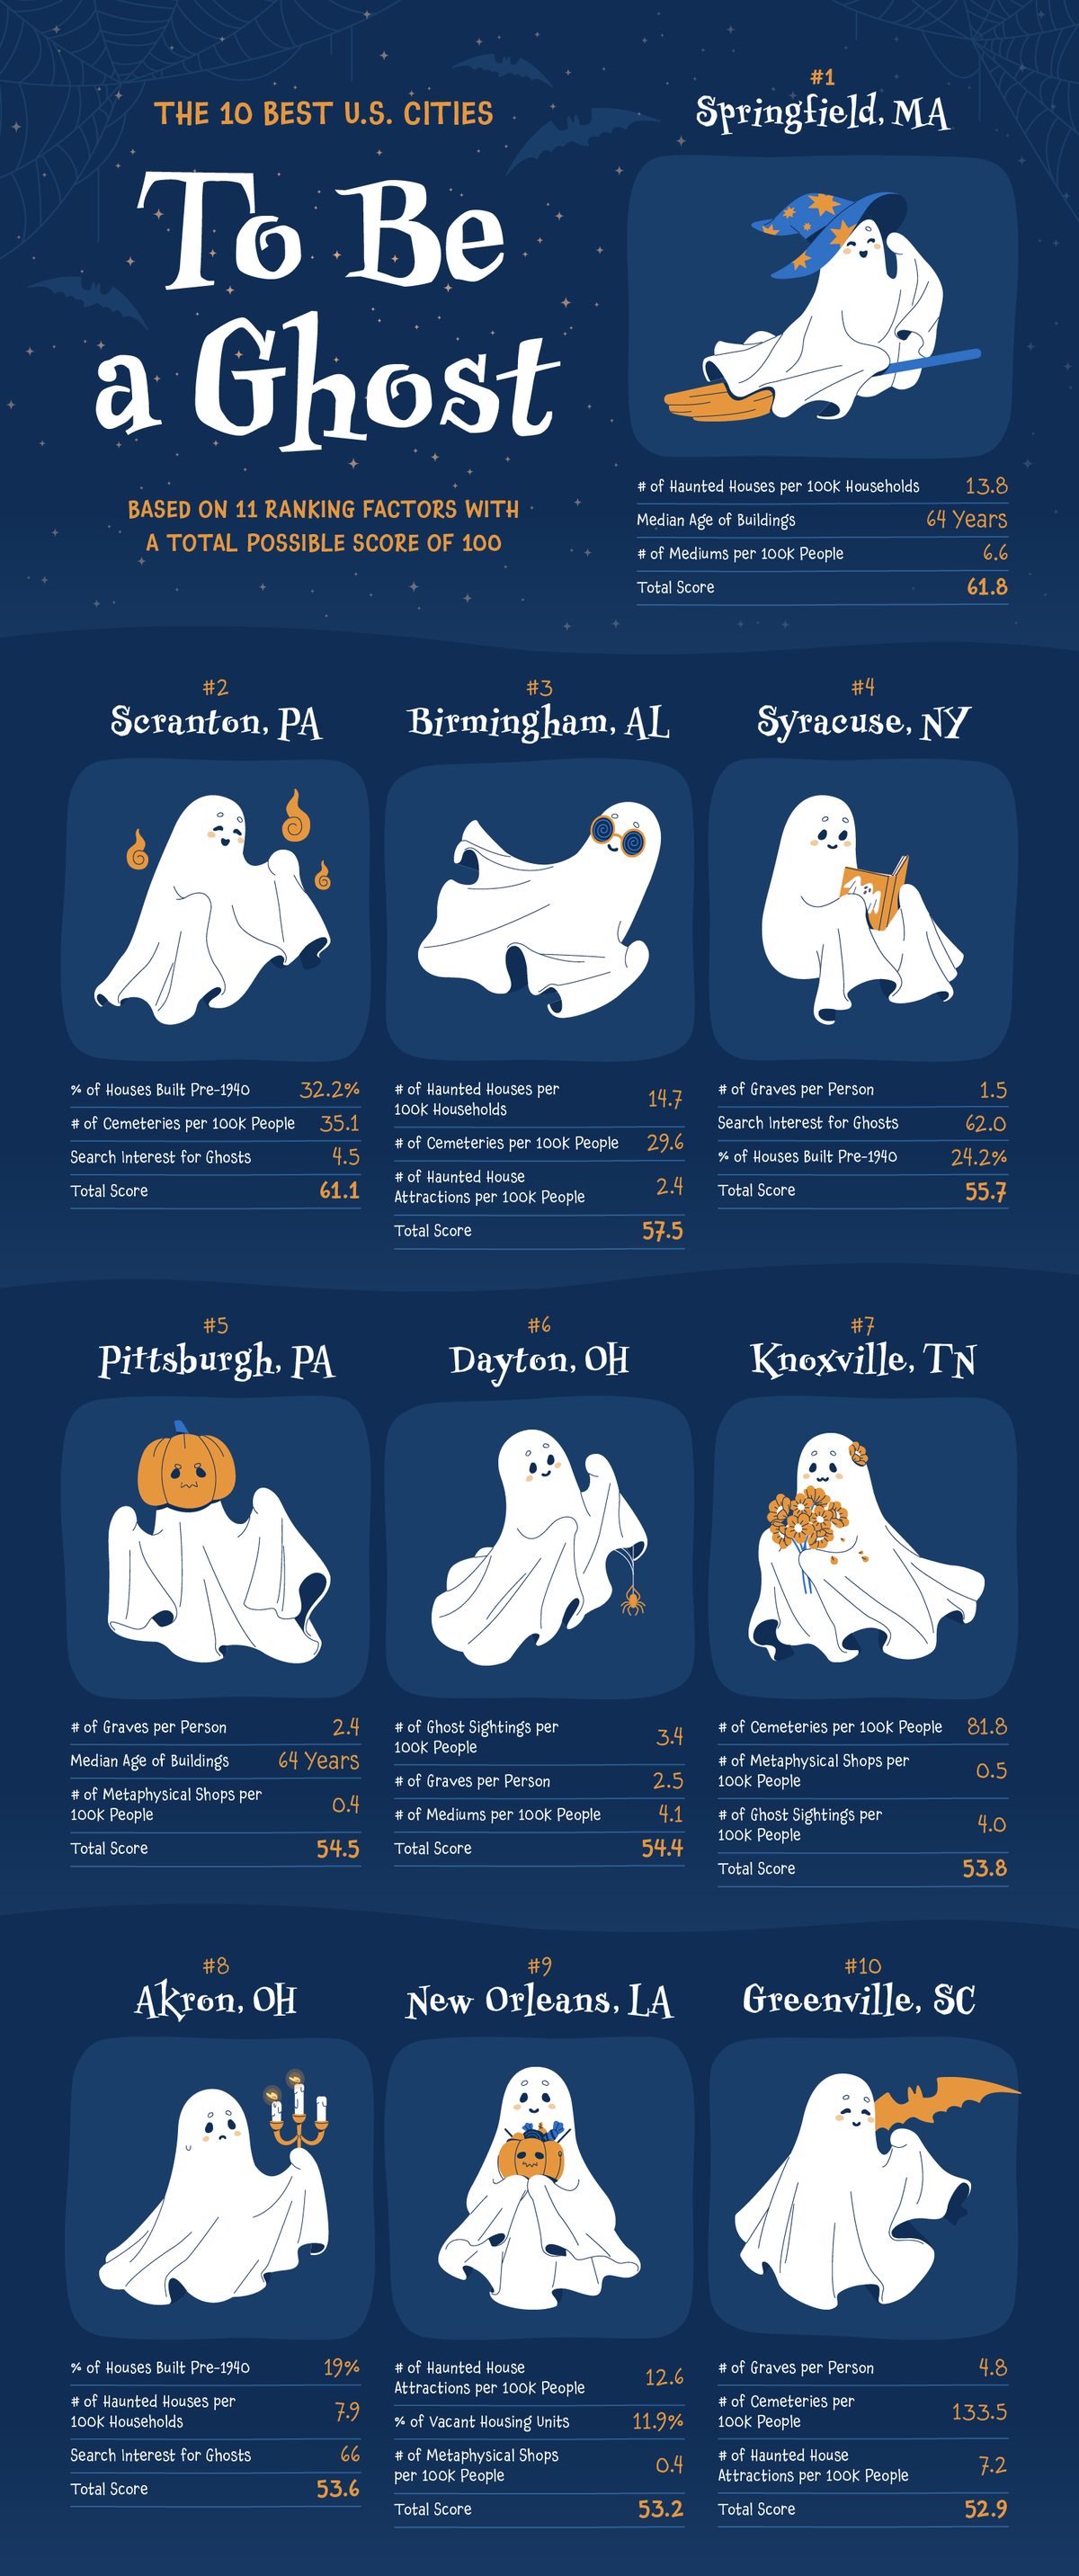 A graphic showing the 10 best U.S. cities to be a ghost
